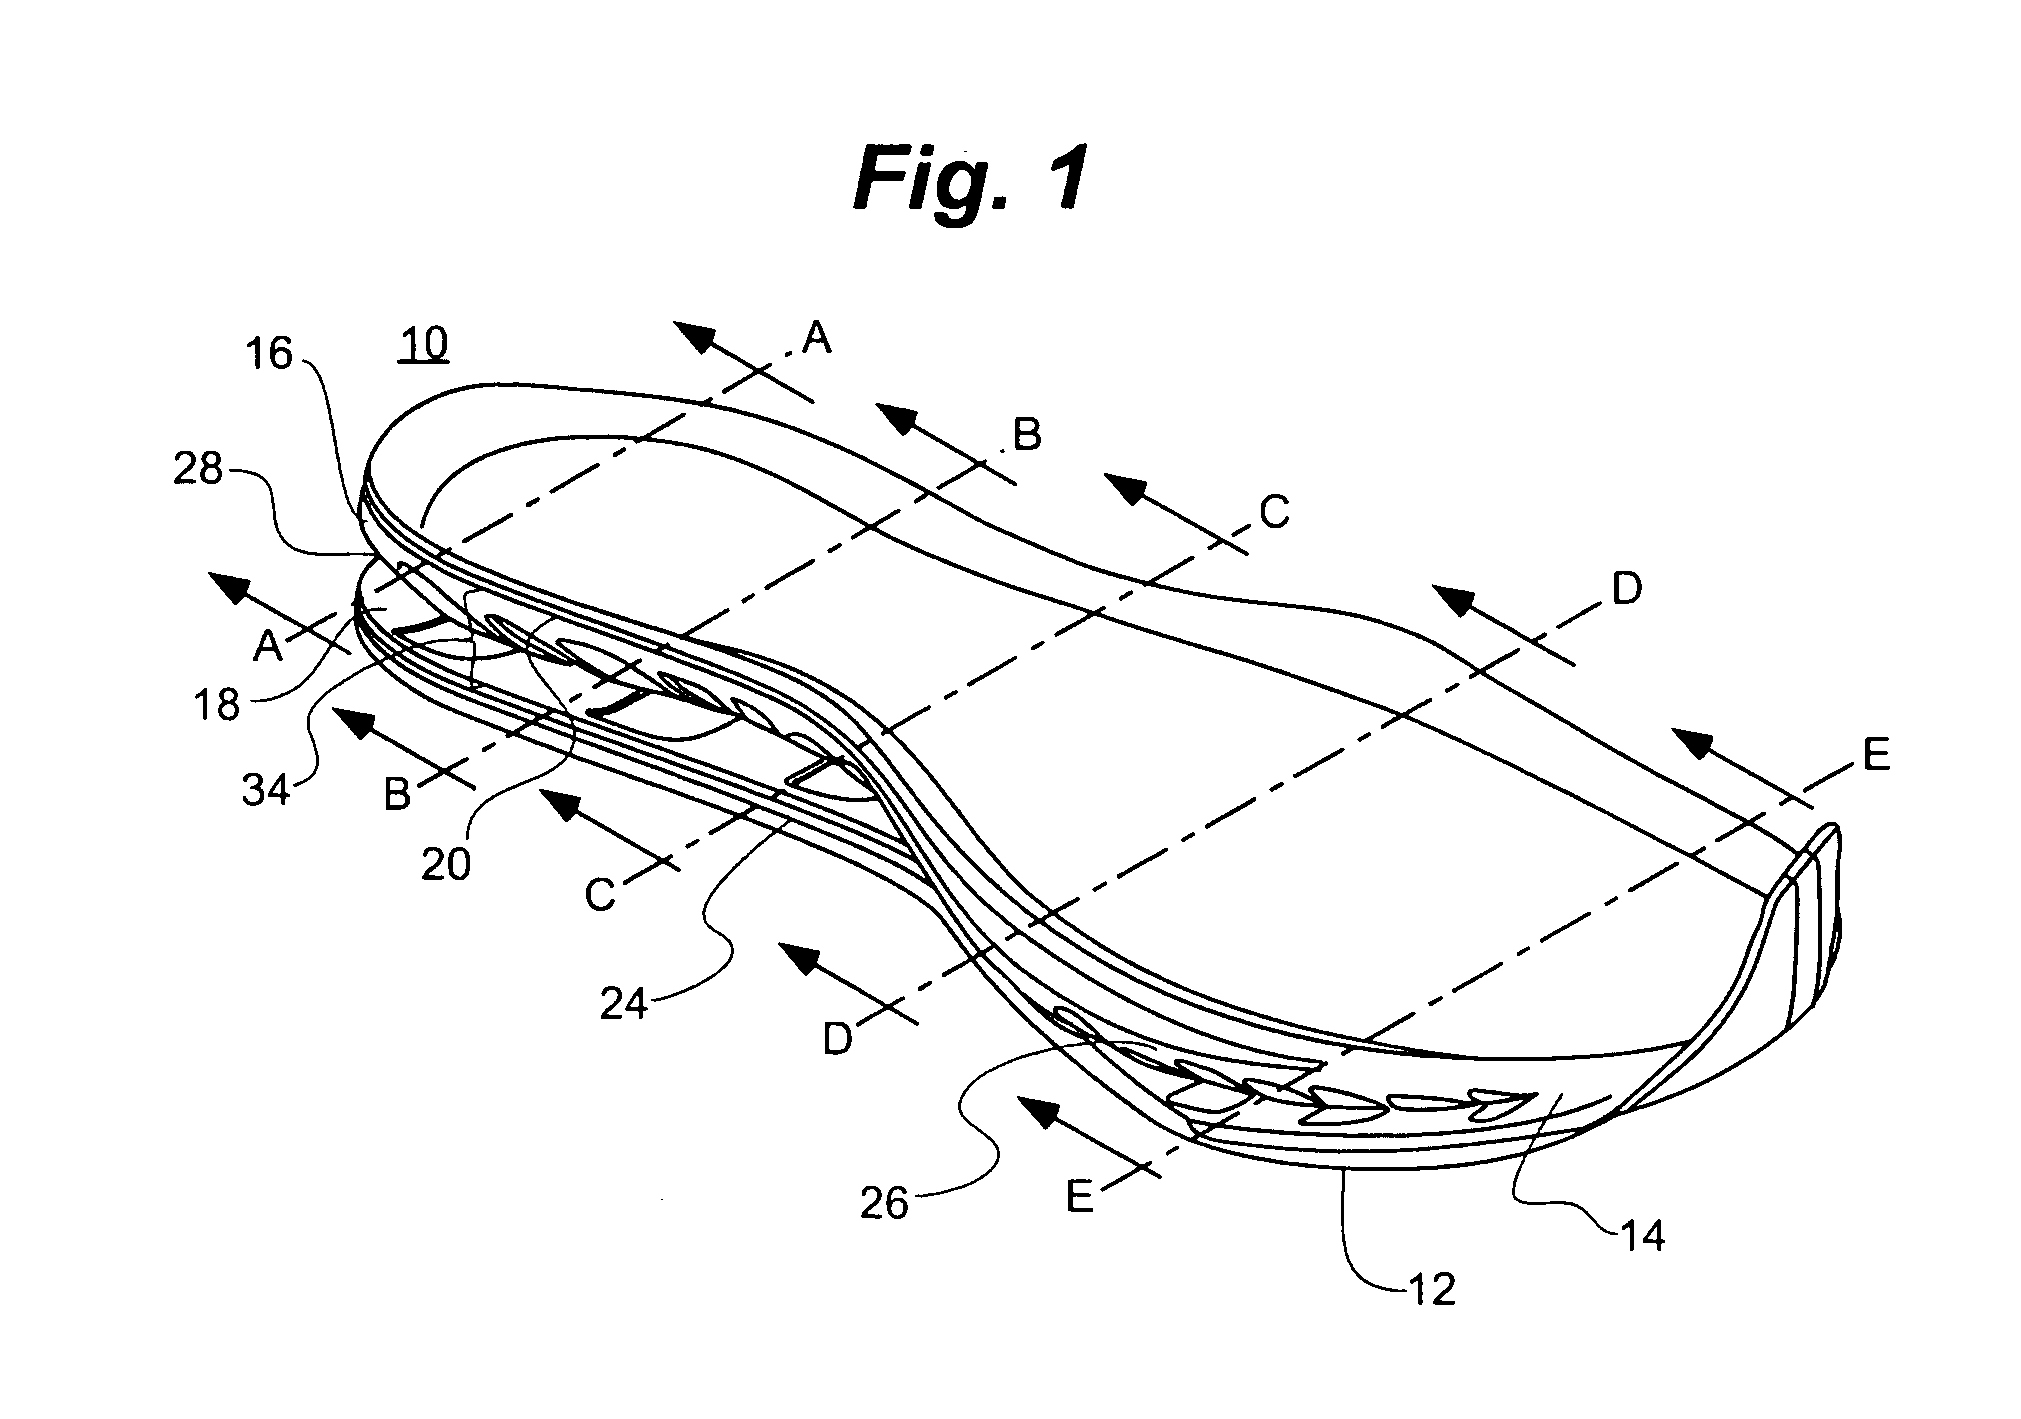 Shoe sole for increasing instability